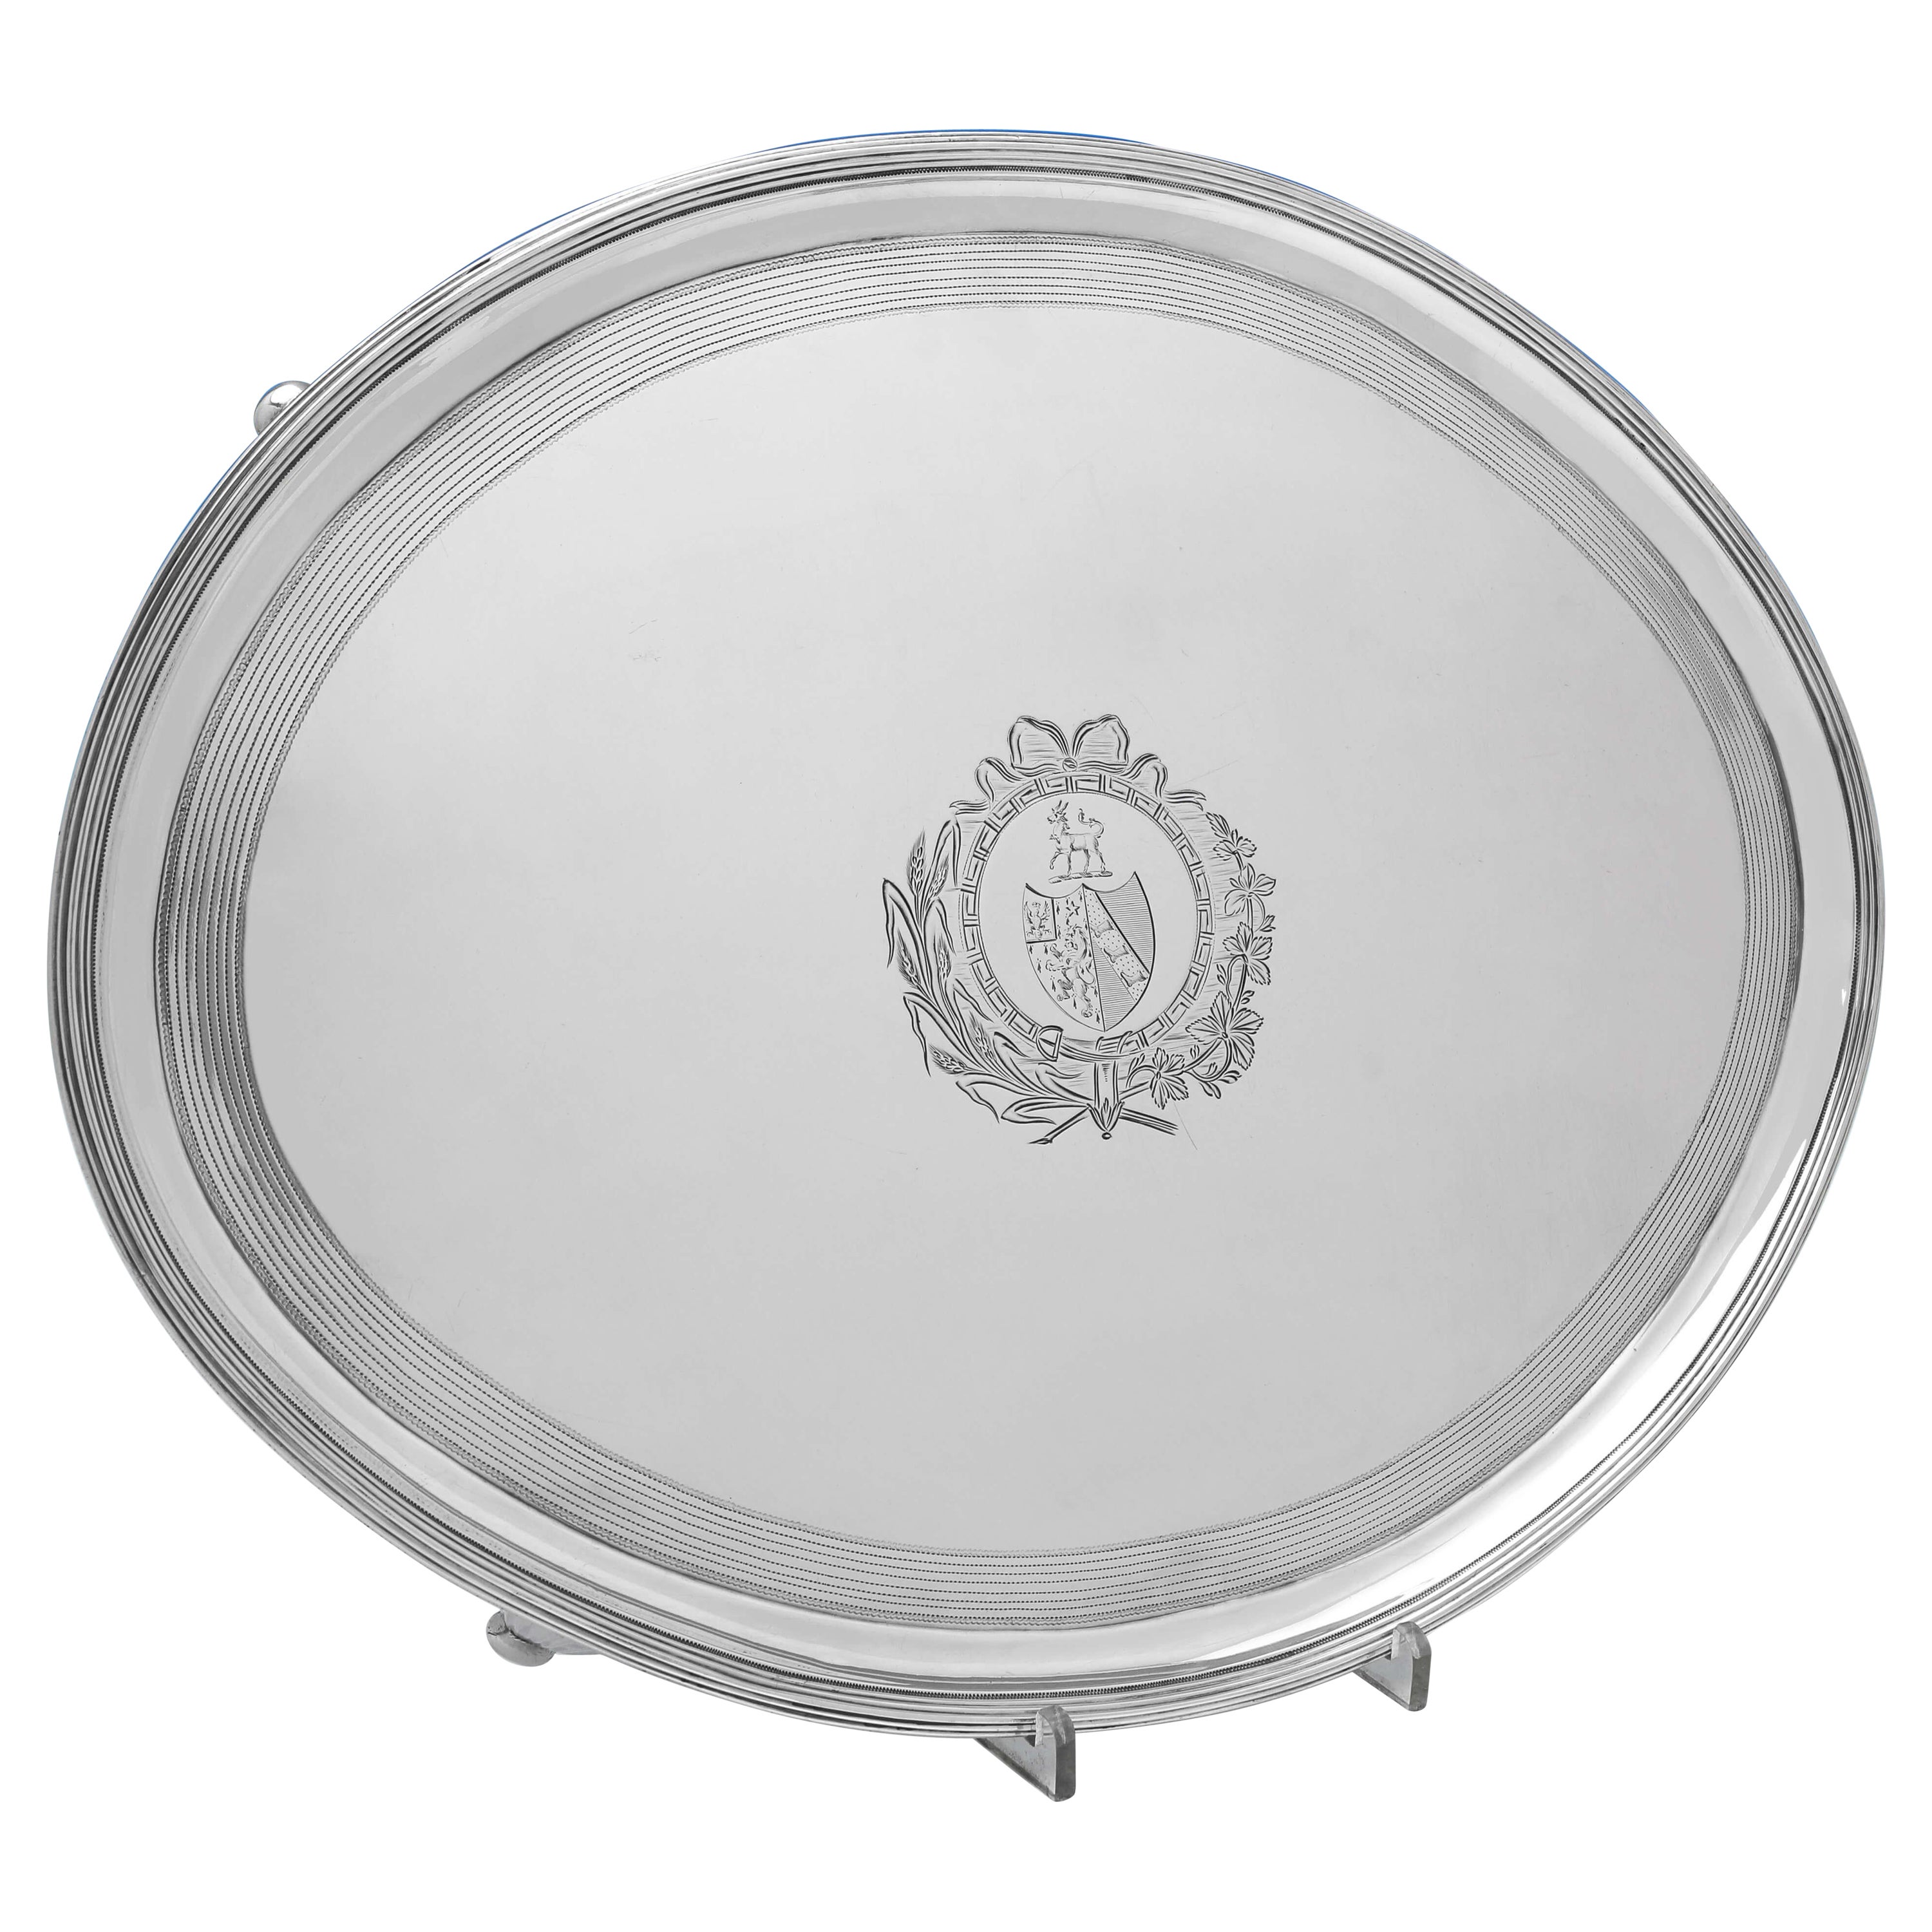 Neoclassical George III Period Antique Sterling Silver Salver - London 1795